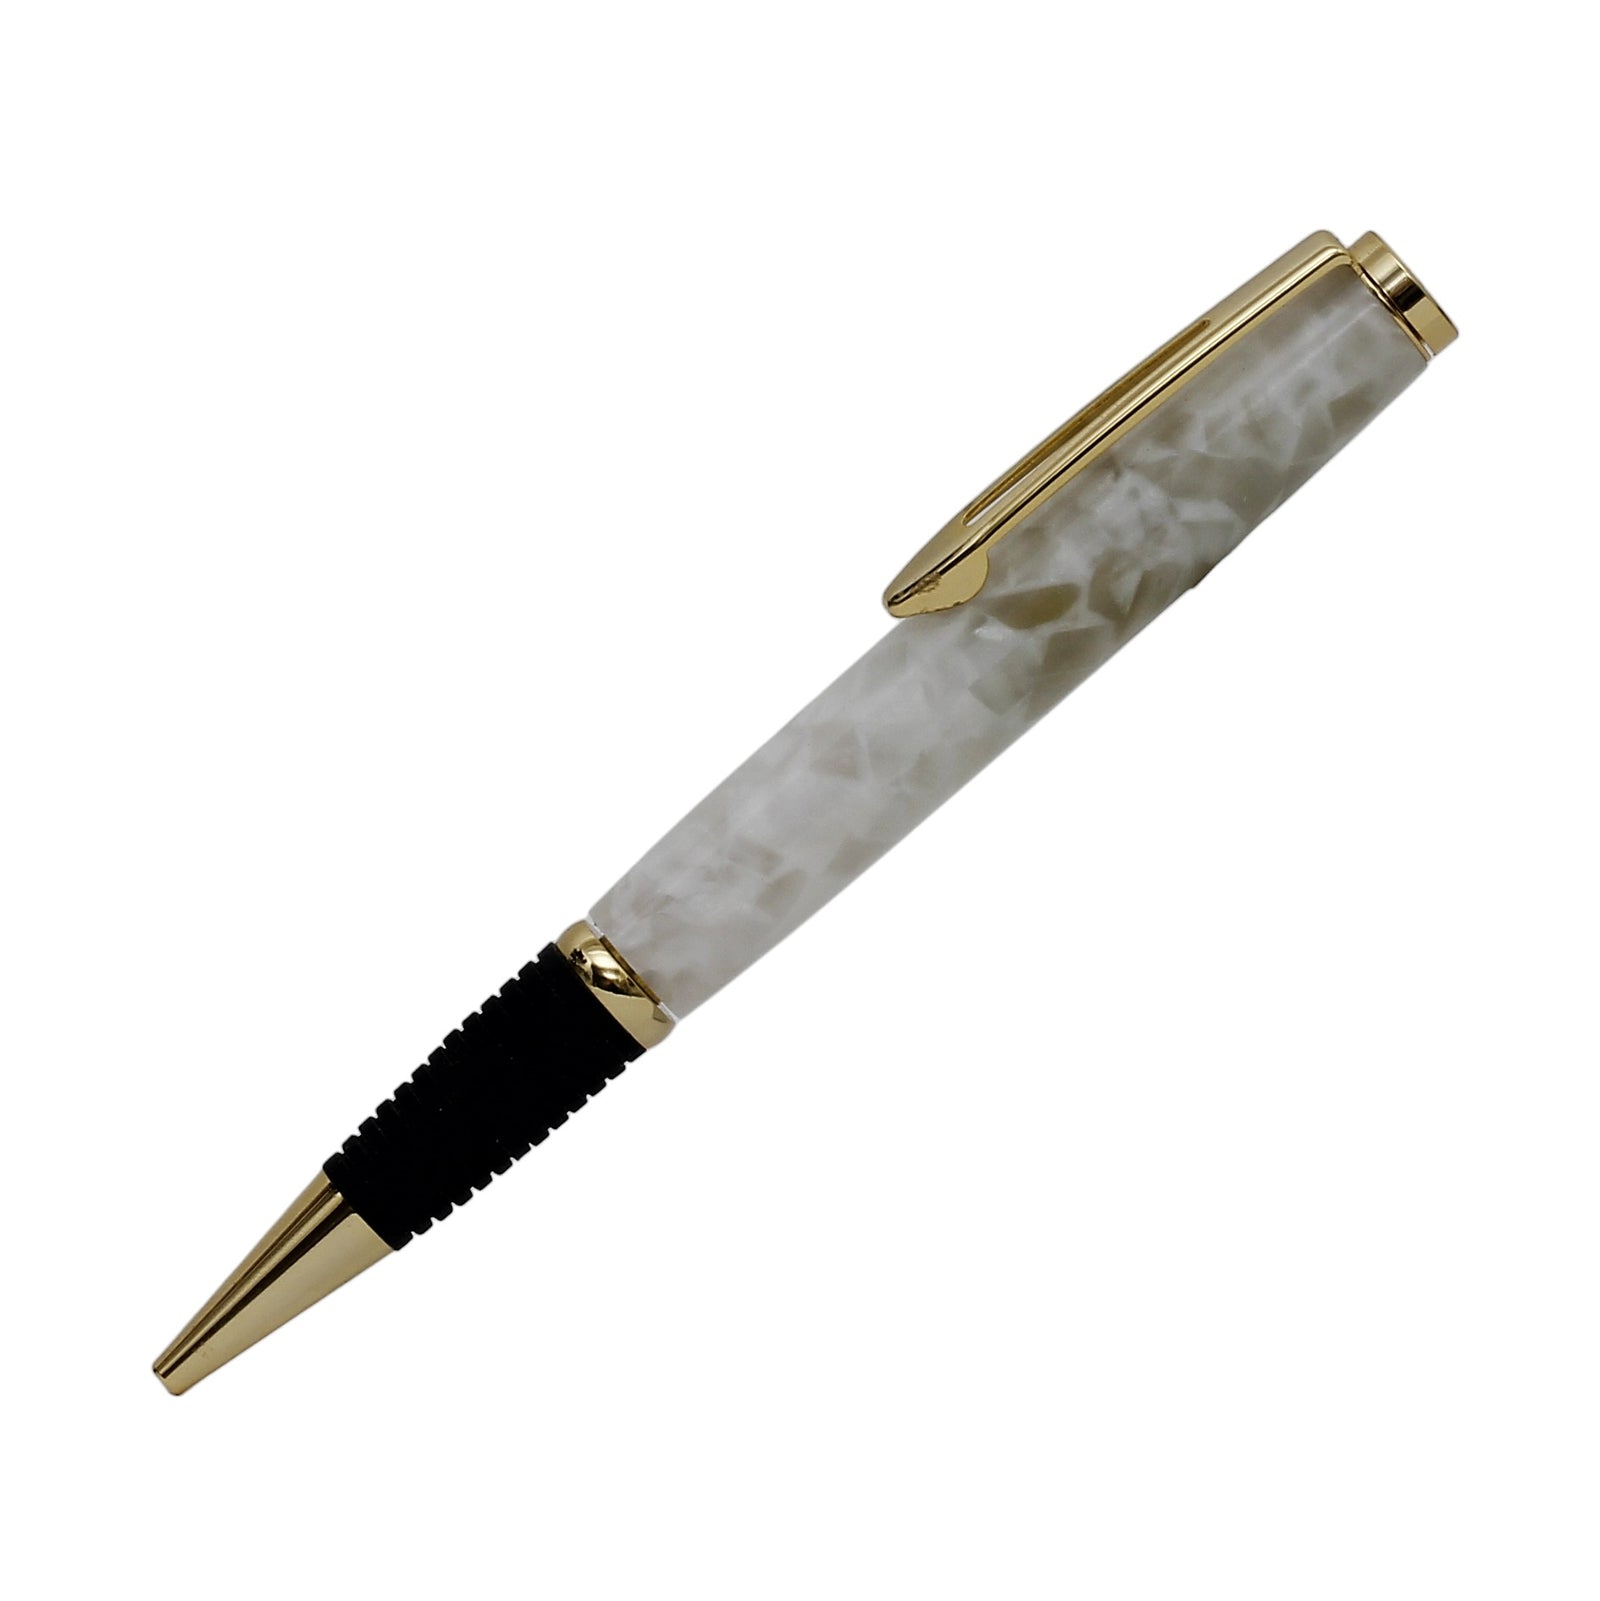 ART-PEN: Handcrafted Luxury Twist Rollerball Pen - GOLD with ACQUAPEARL acrylic hand turned body - Artistica.com